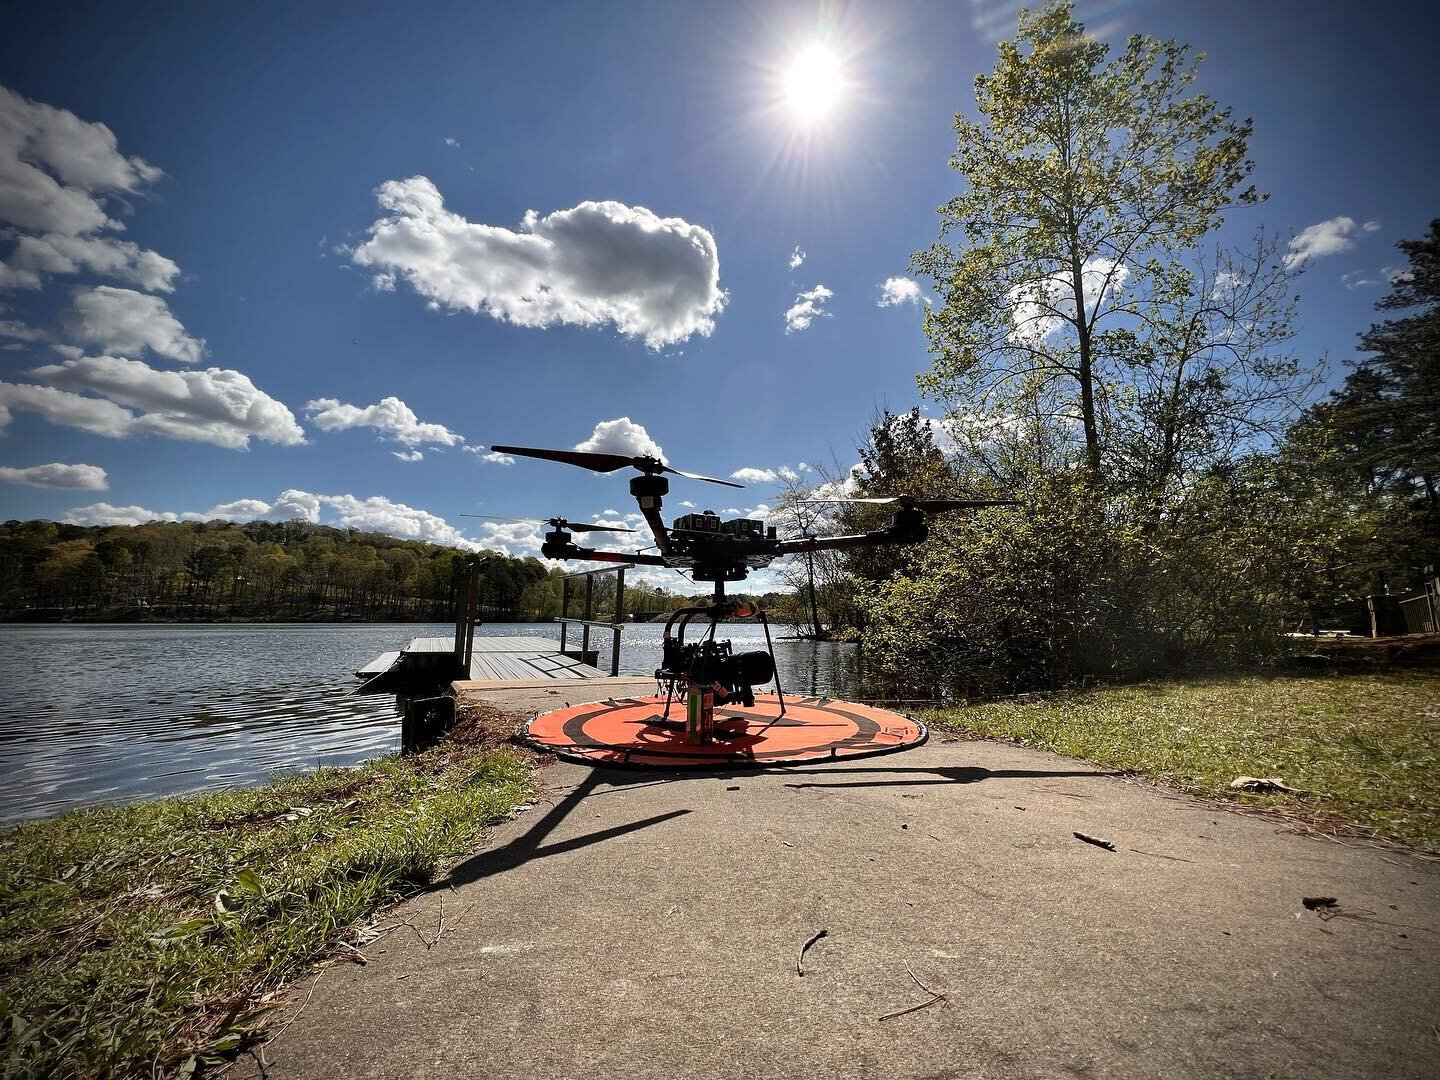 Low over water with the Alta X 🎬🚁 #setlife #gabedlp #droneteam #aerialmob